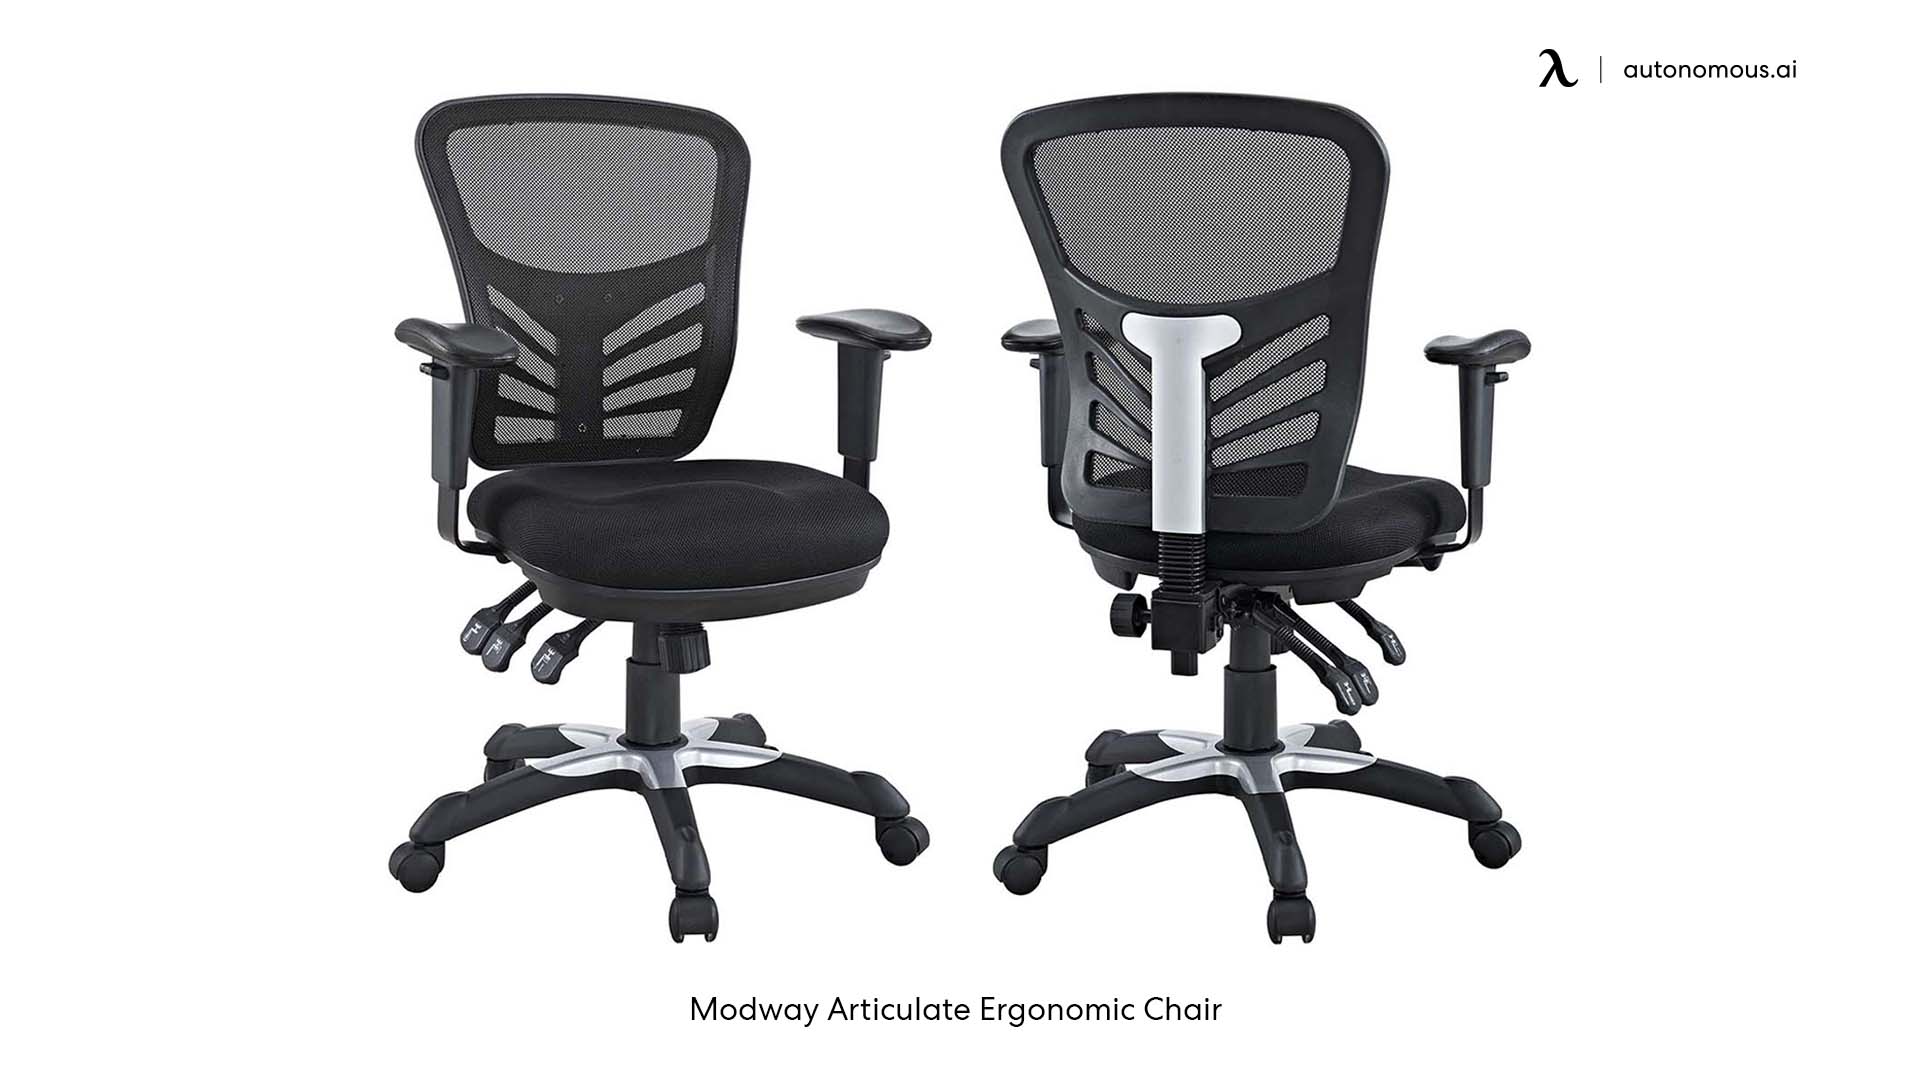 Modway Articulate Chair for employee